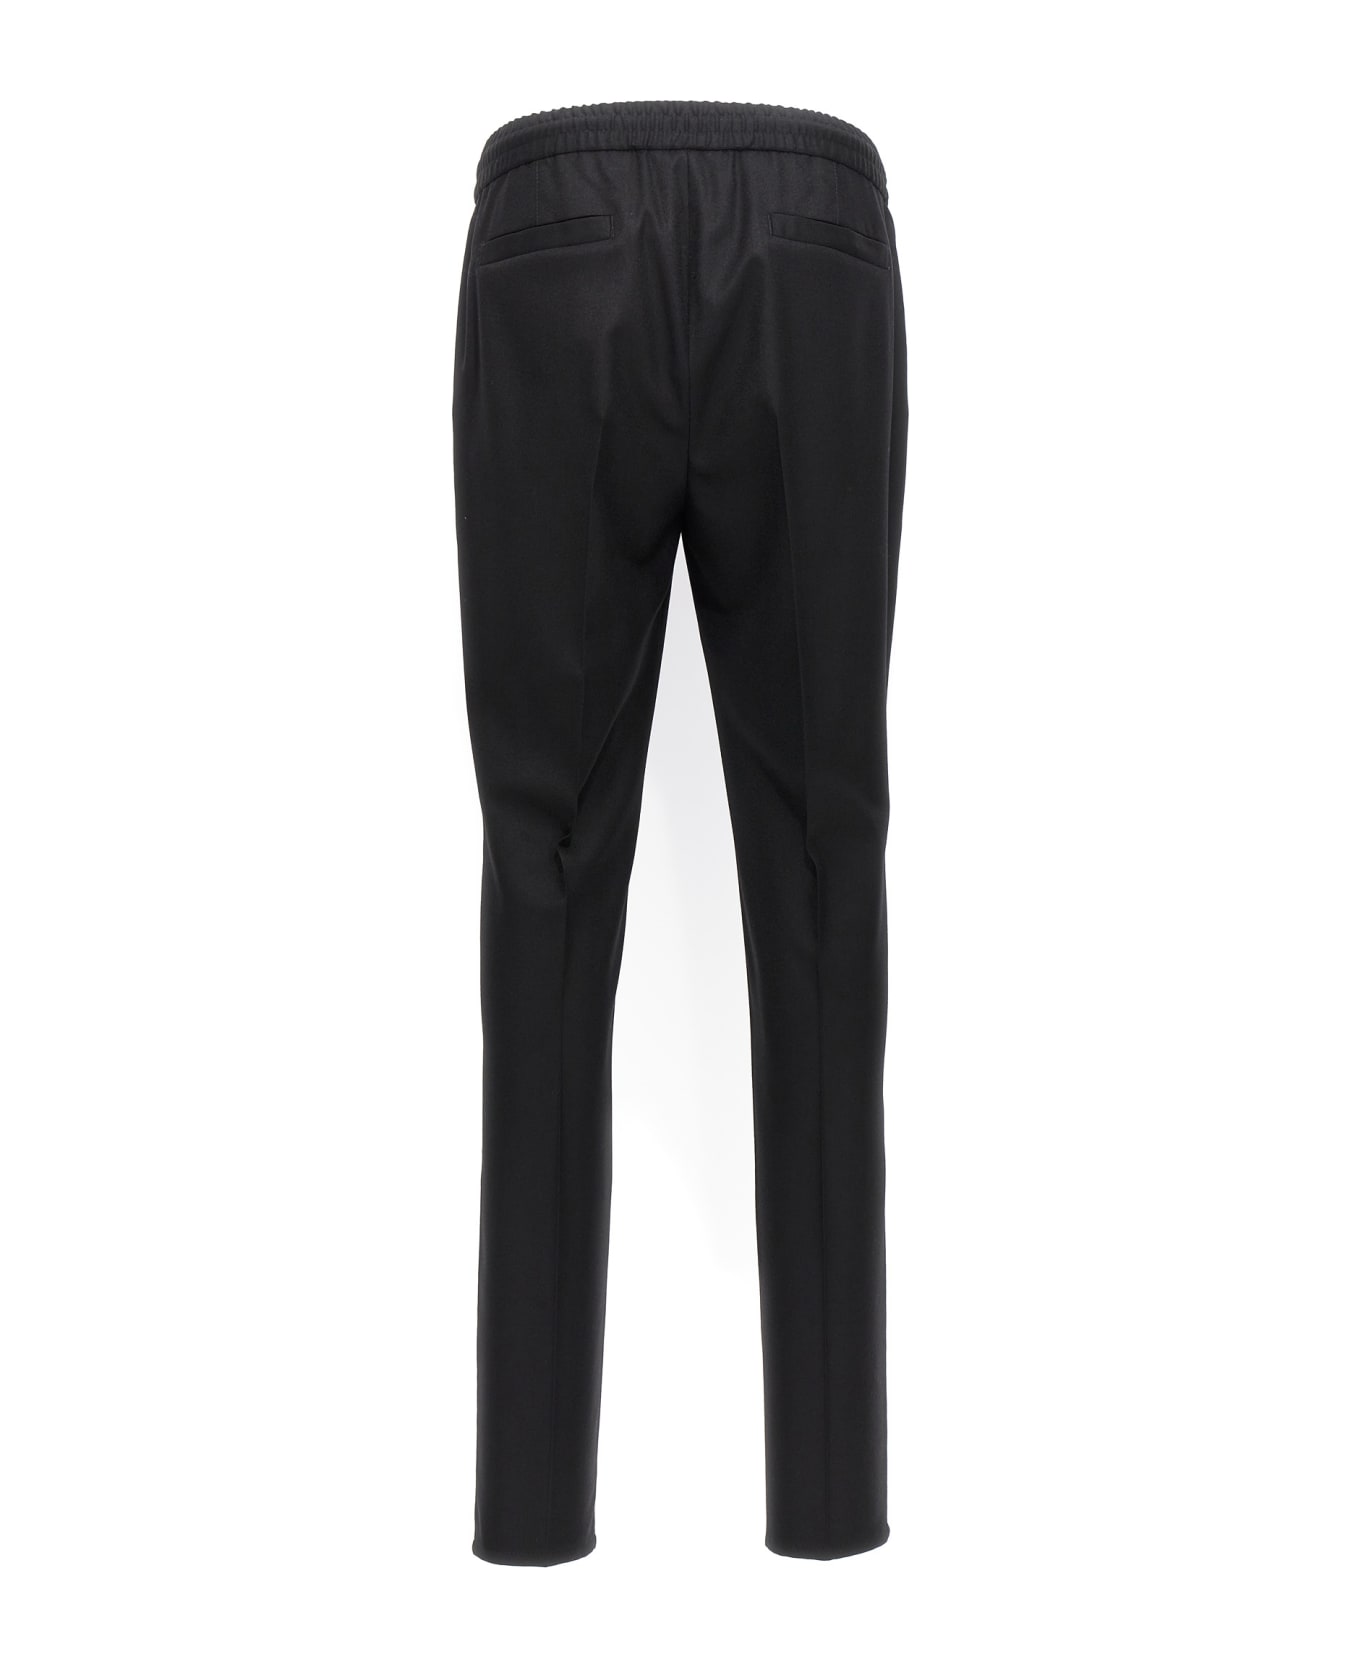 Brunello Cucinelli Wool Pants With Front Pleats - Black ボトムス